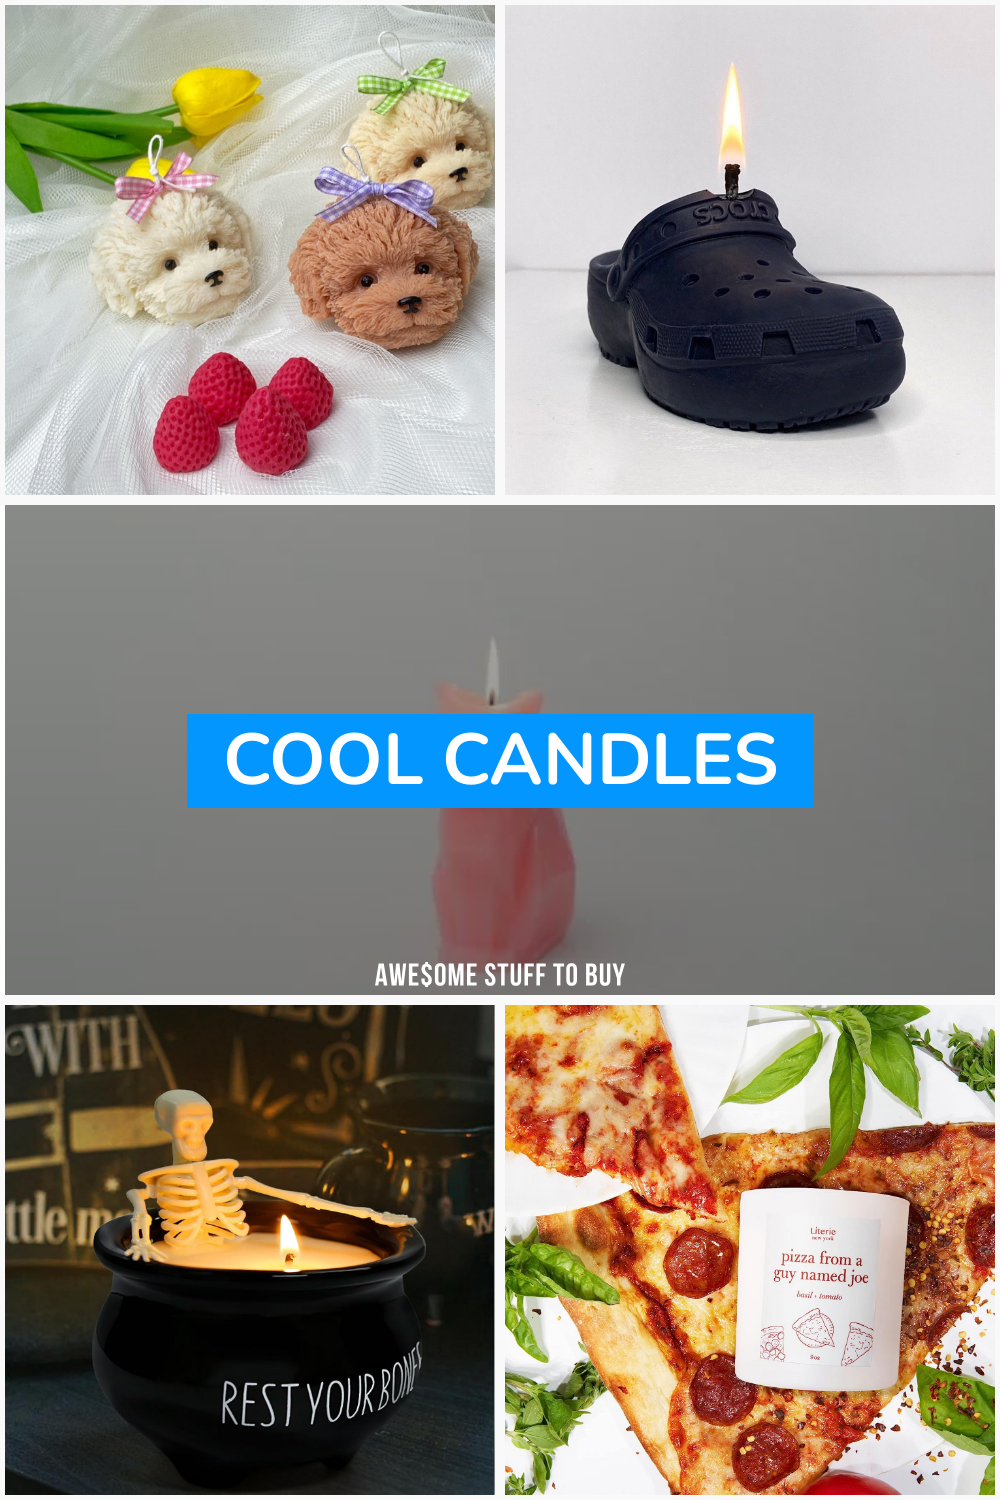 Cool Candles // Awesome Stuff to Buy